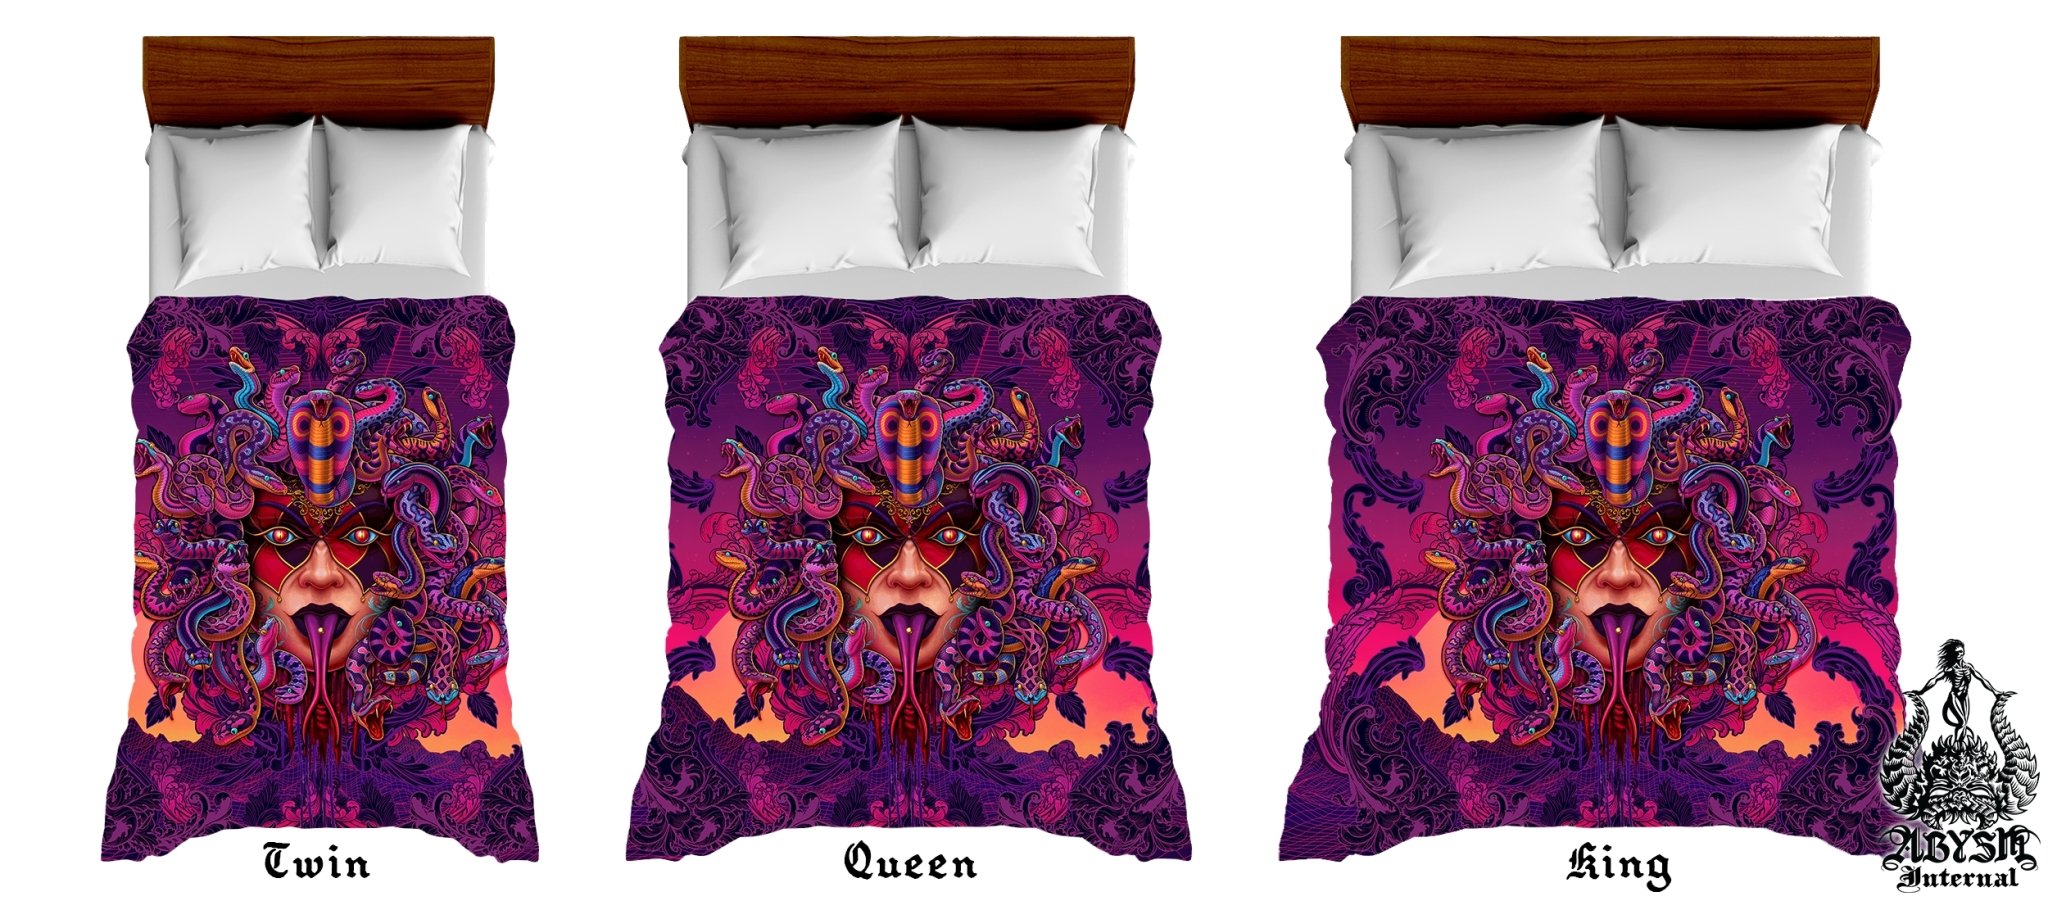 Psychedelic Bedding Set, Comforter and Duvet, Vaporwave Bed Cover and Retrowave Bedroom Decor, King, Queen and Twin Size, Synthwave and Fantasy Gamer 80s Room - Medusa Mock - Abysm Internal